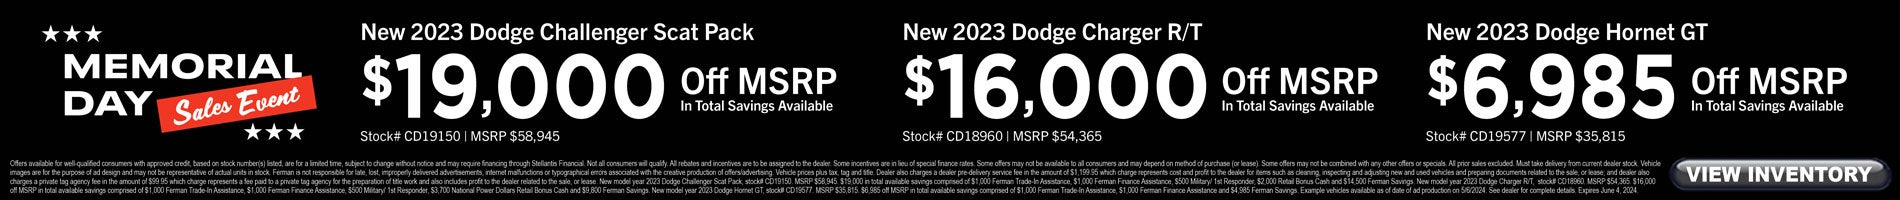 May Savings on New Dodge Hornet, Challenger and Charger